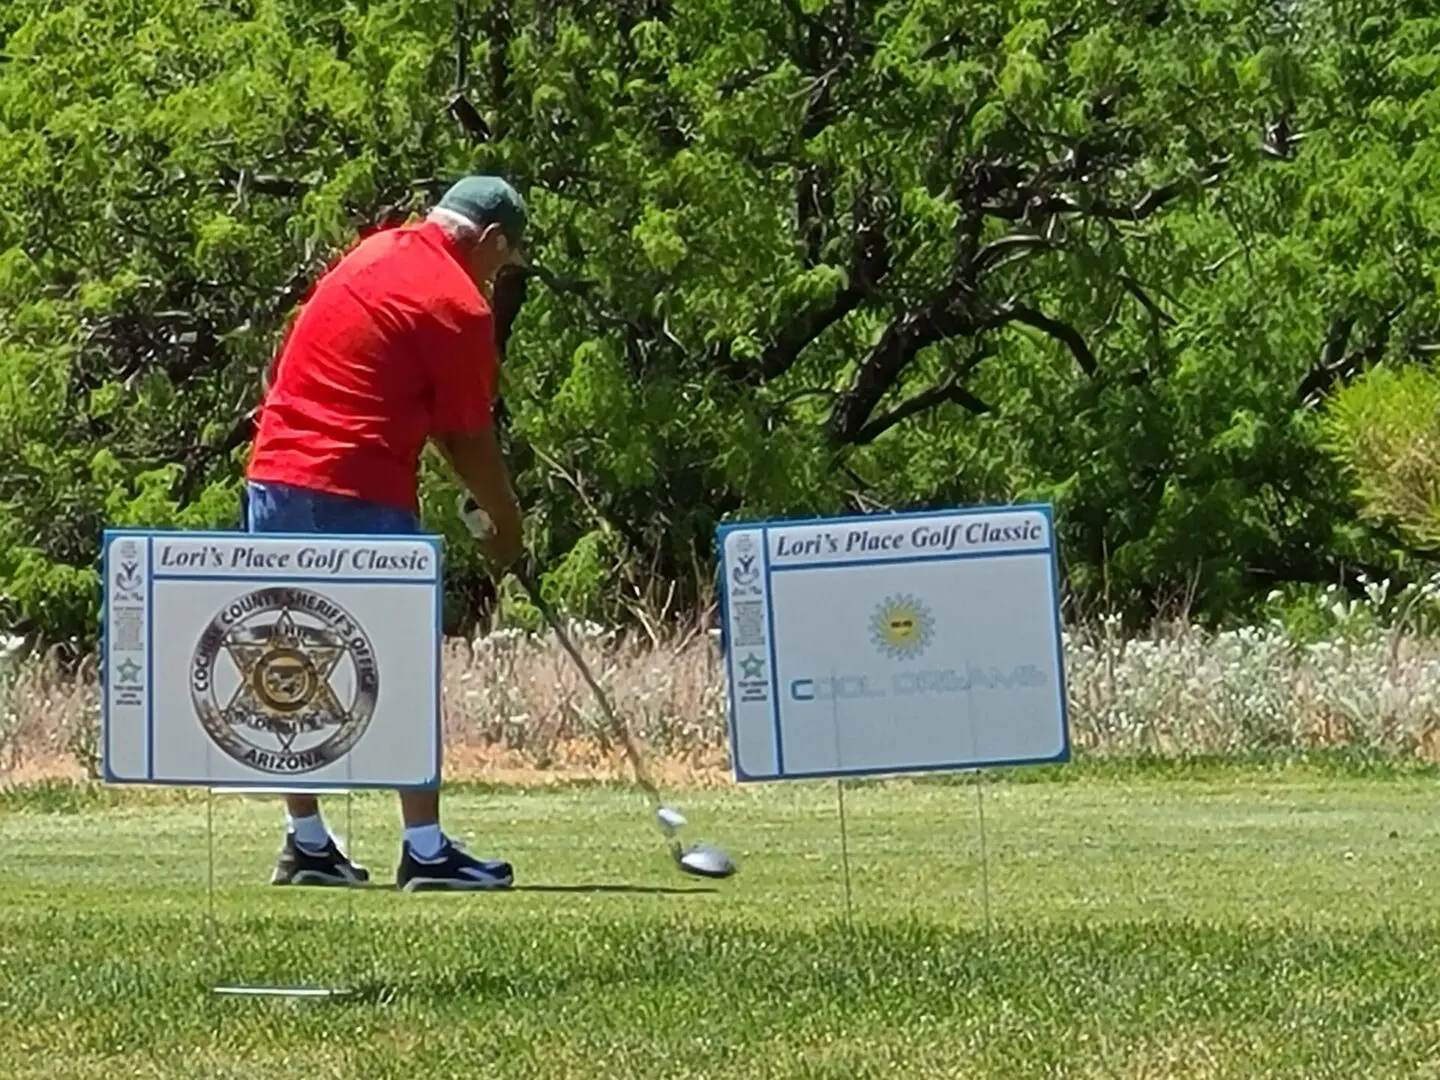 A man playing golf on the green with two signs.